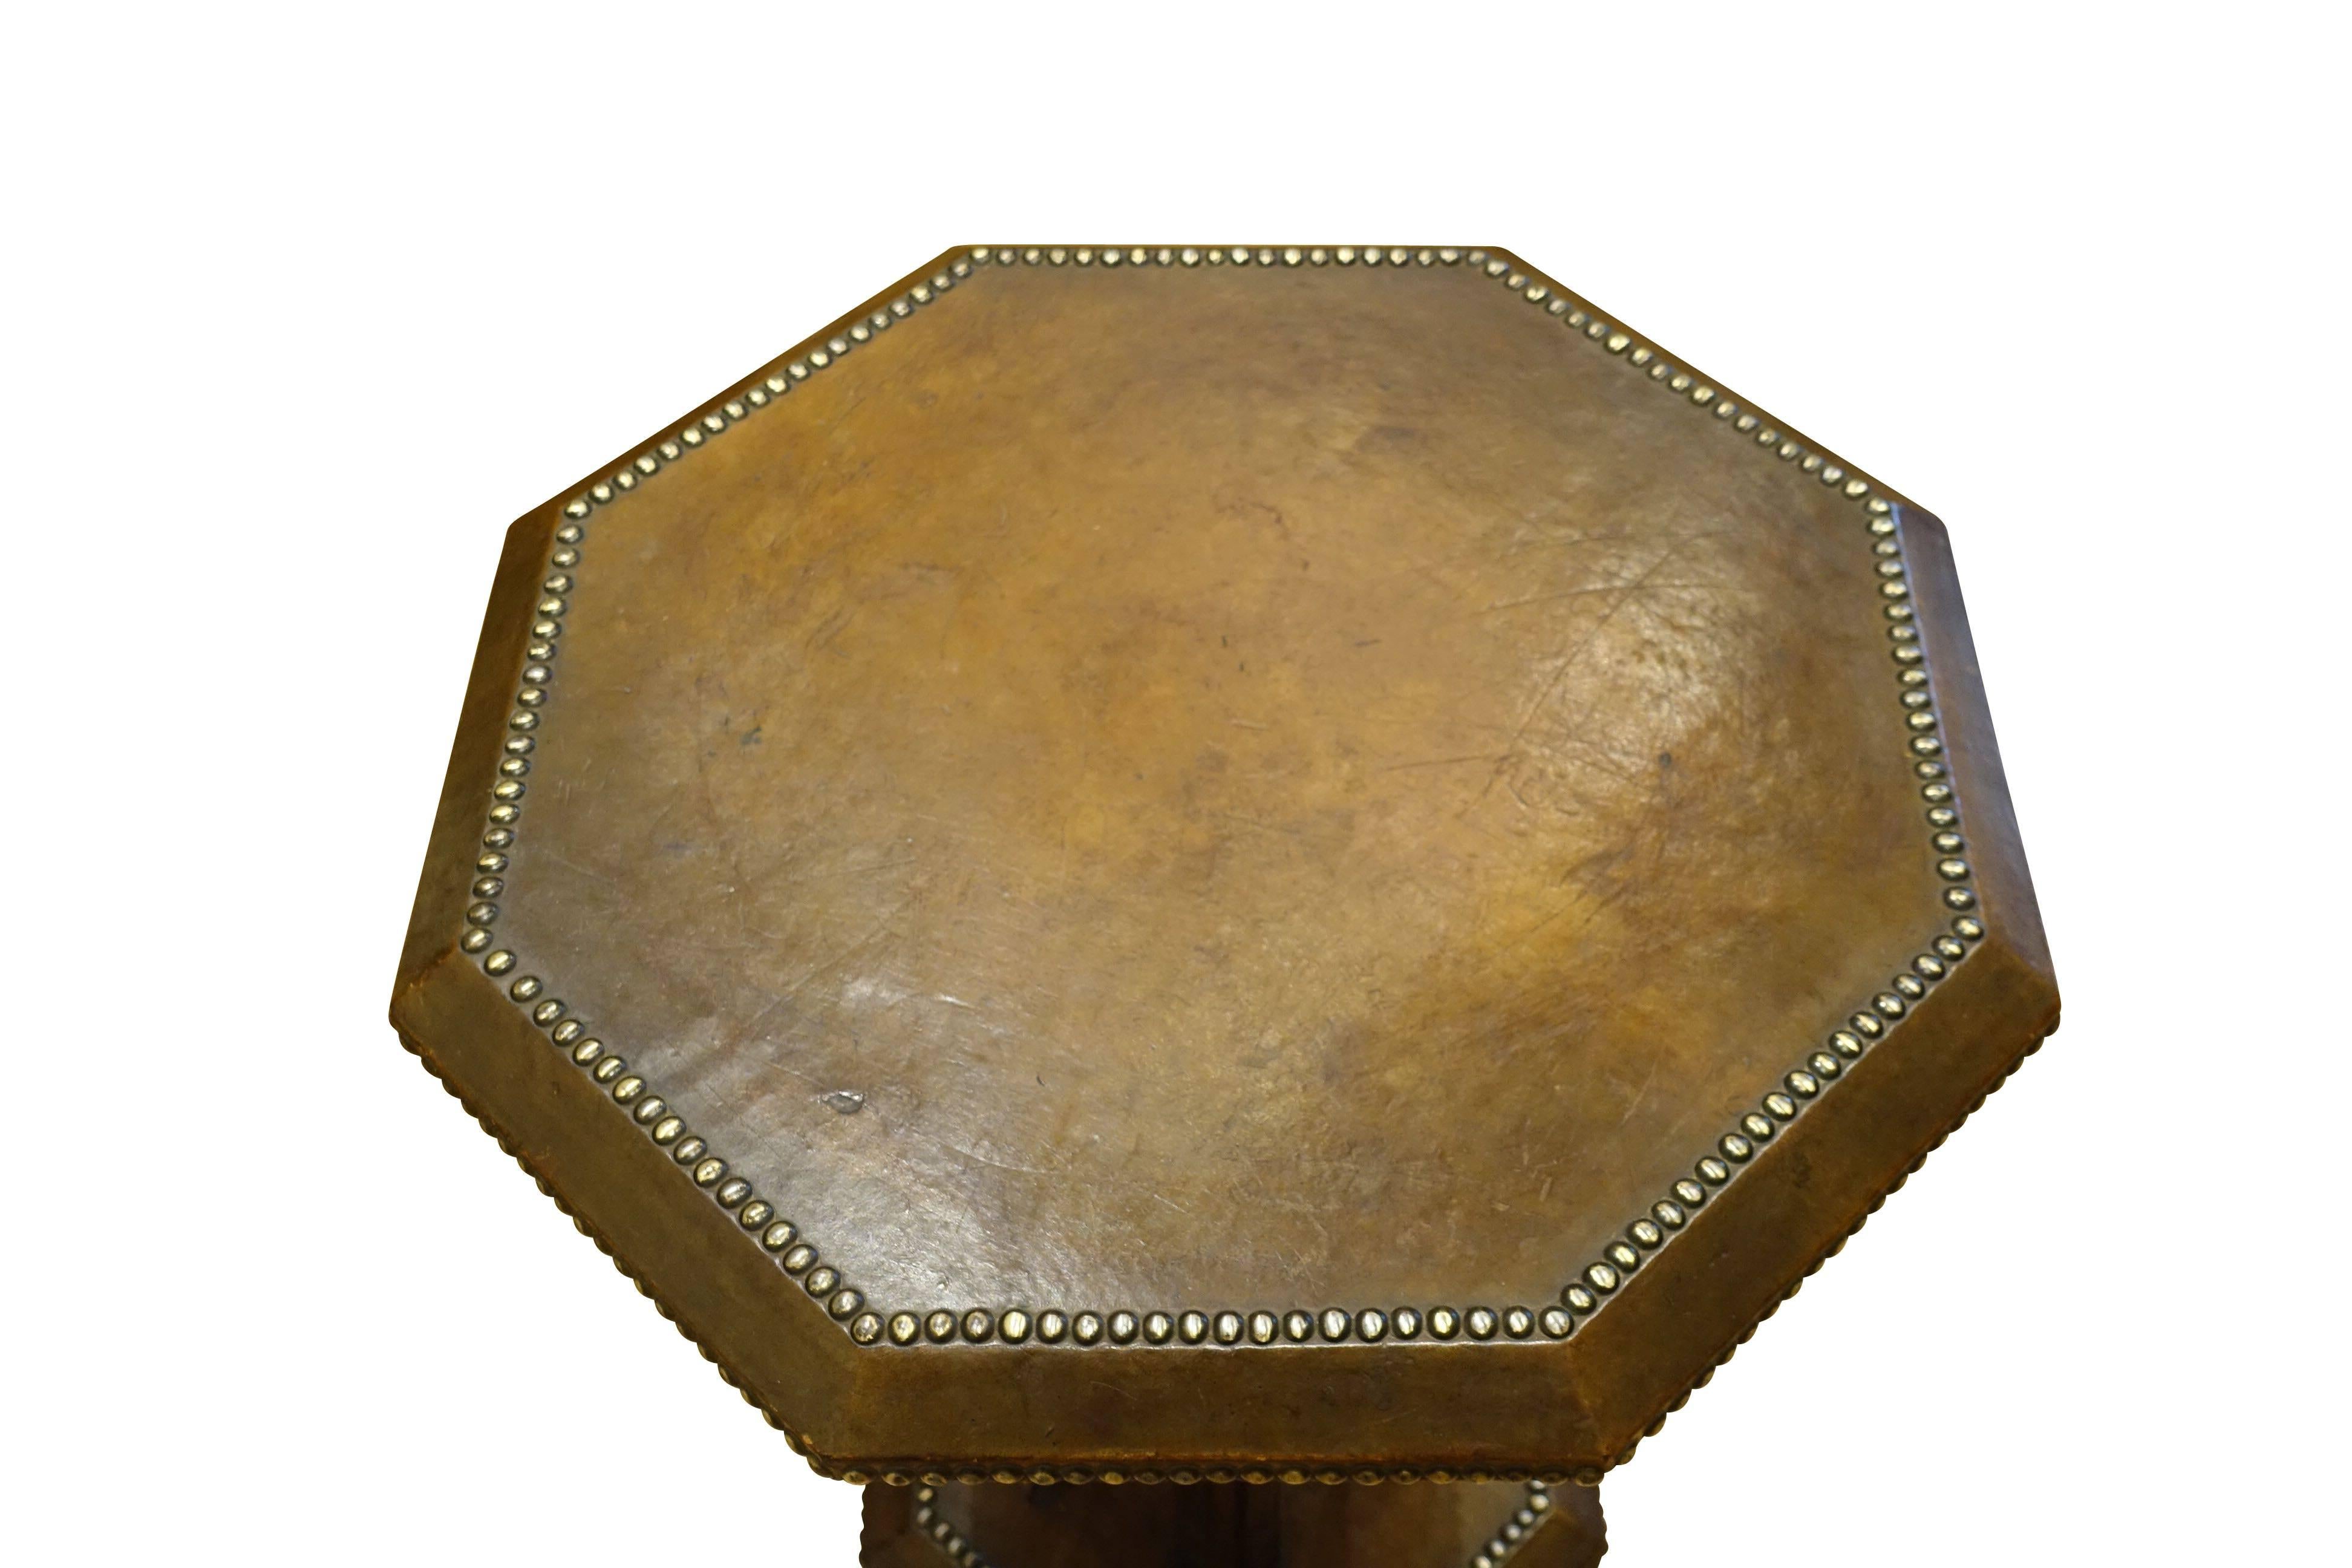 1930s English octagonally shaped brown leather side table with decorative brass tacks.
Two-tiered, leather lower shelf as well. 
Four wooden columns and footed base.
Beautiful leather patina.
 